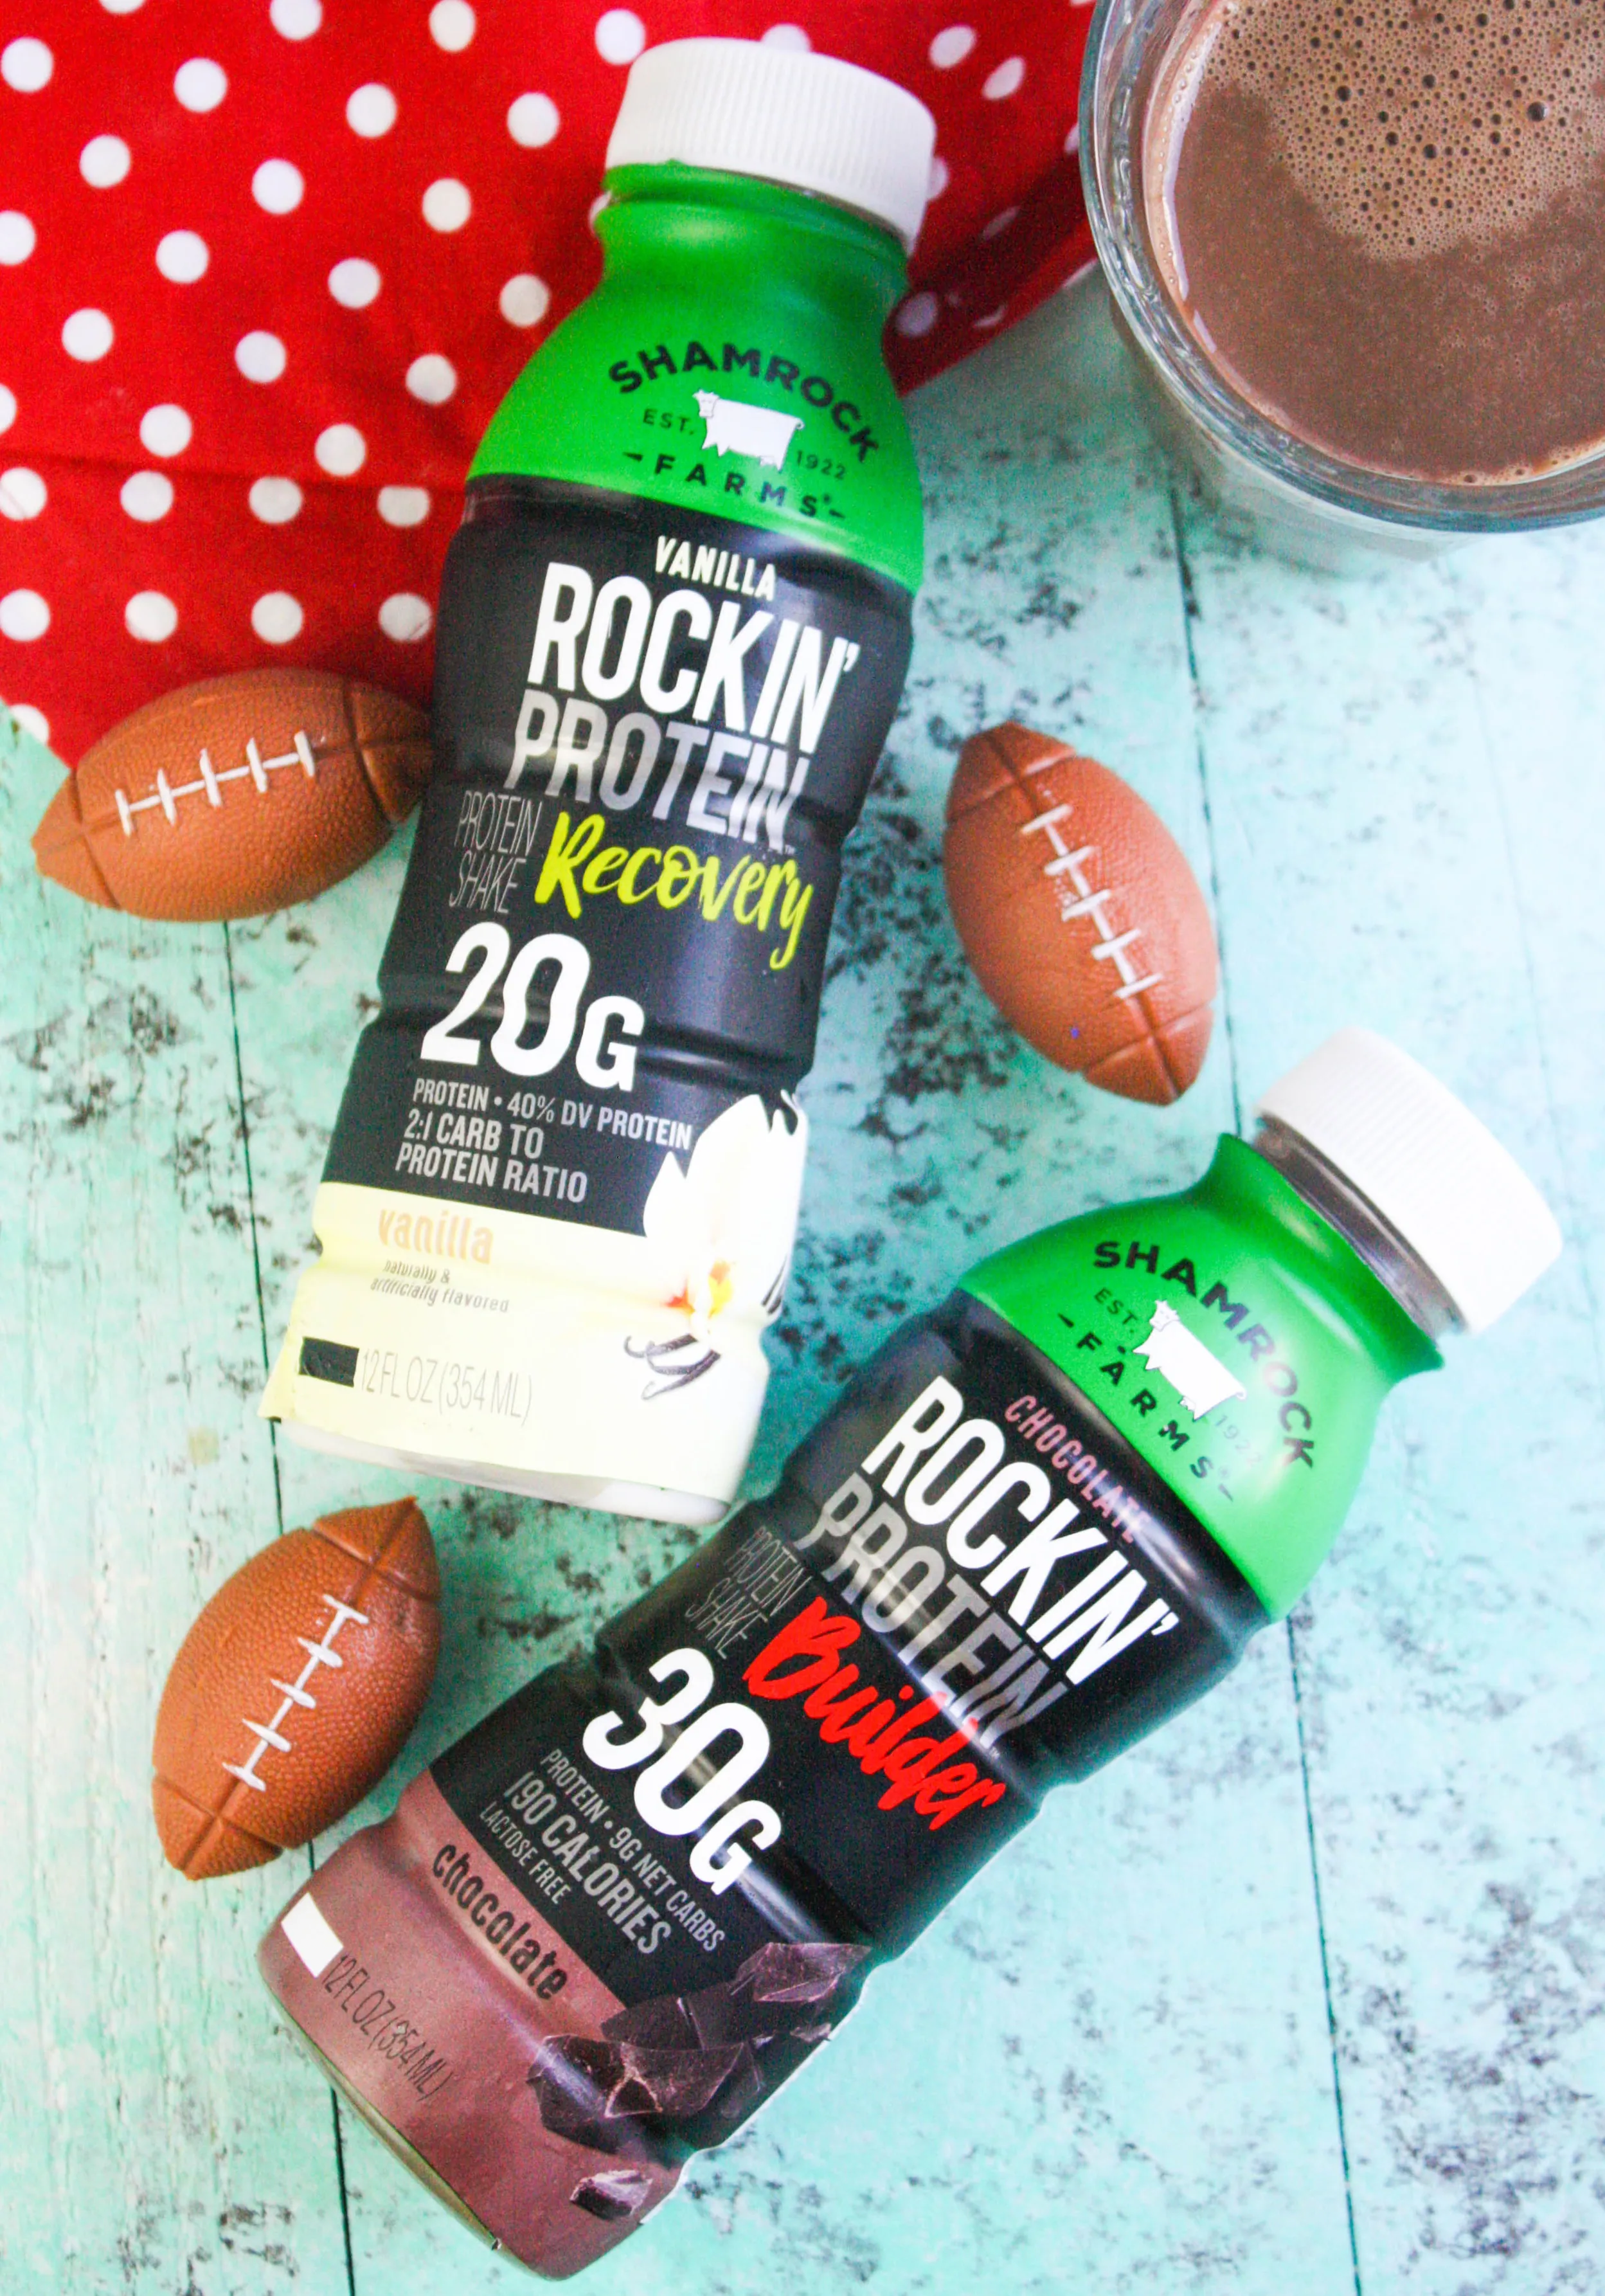 Rockin' Protein drinks from Shamrock Farms are so tasty! Rockin' Protein is a great, healthy drink from Shamrock Farms!